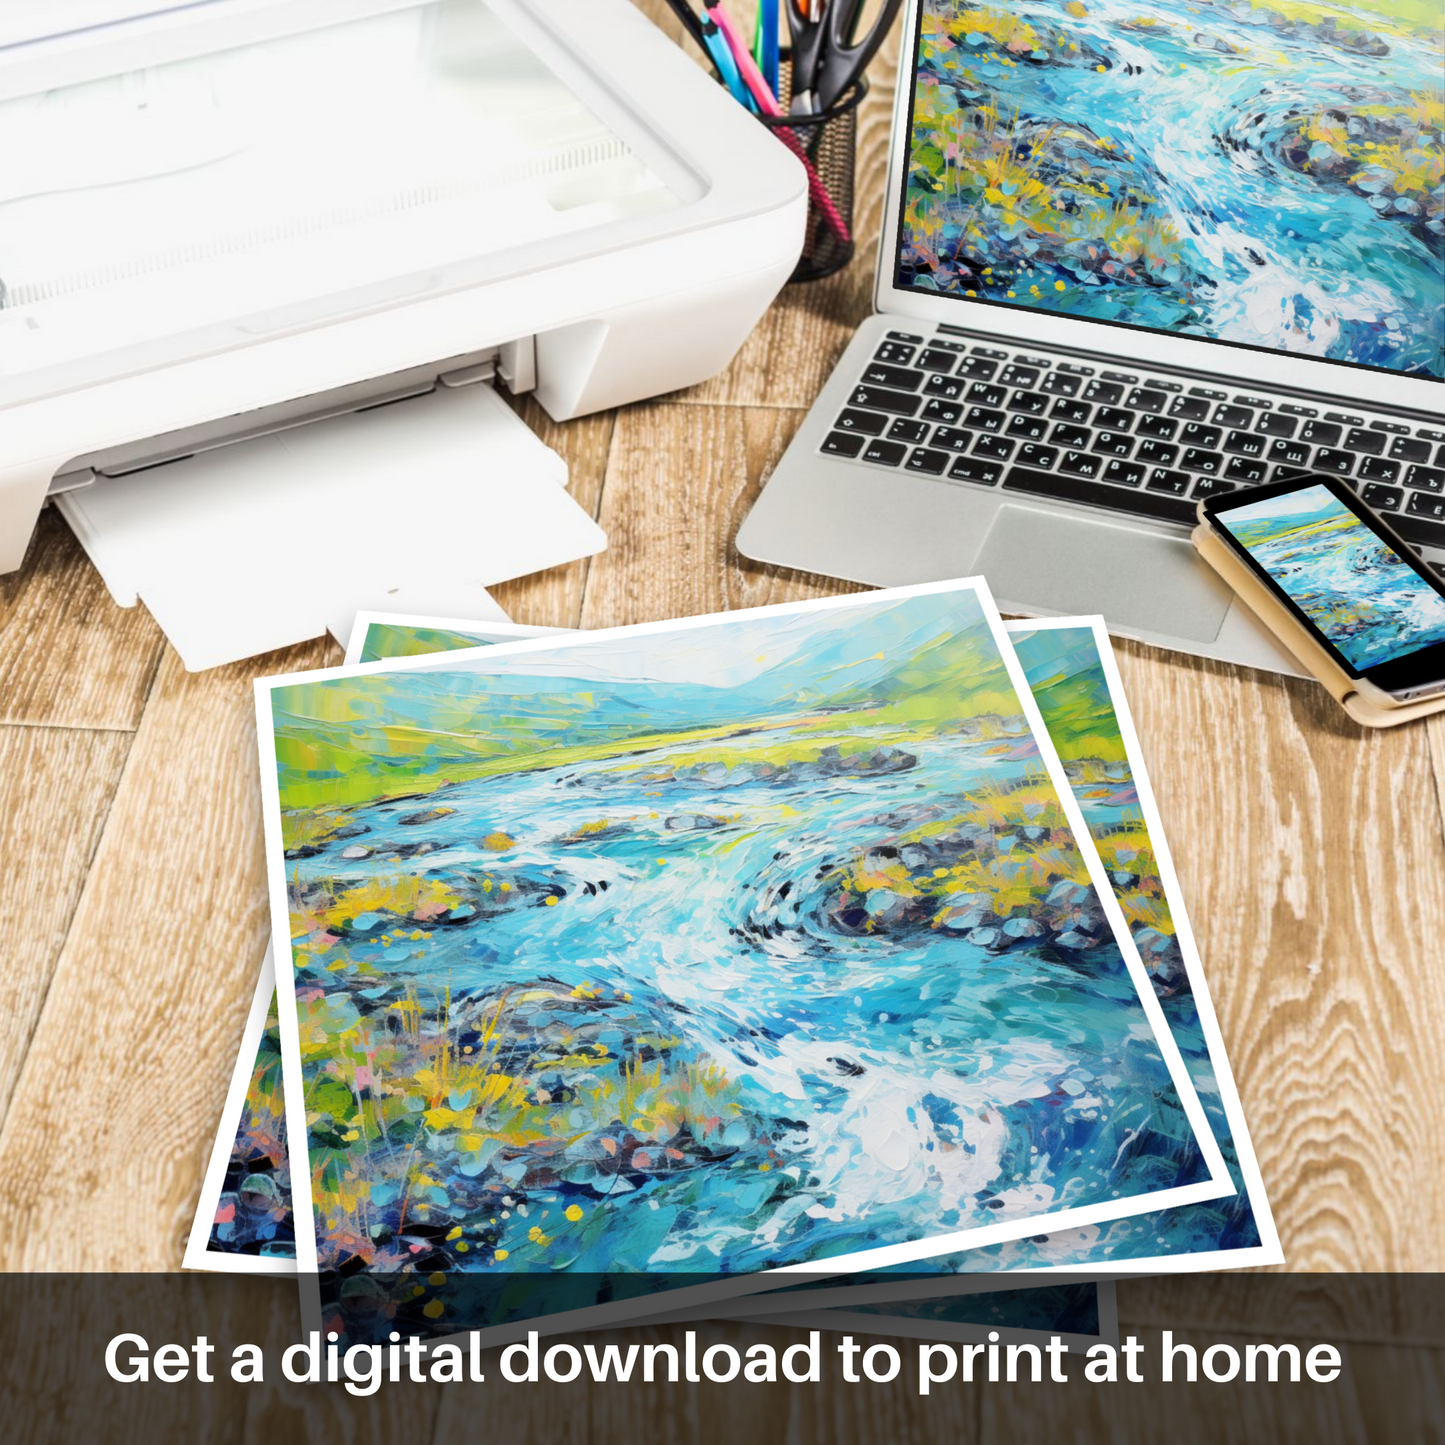 Downloadable and printable picture of River Etive, Argyll and Bute in summer